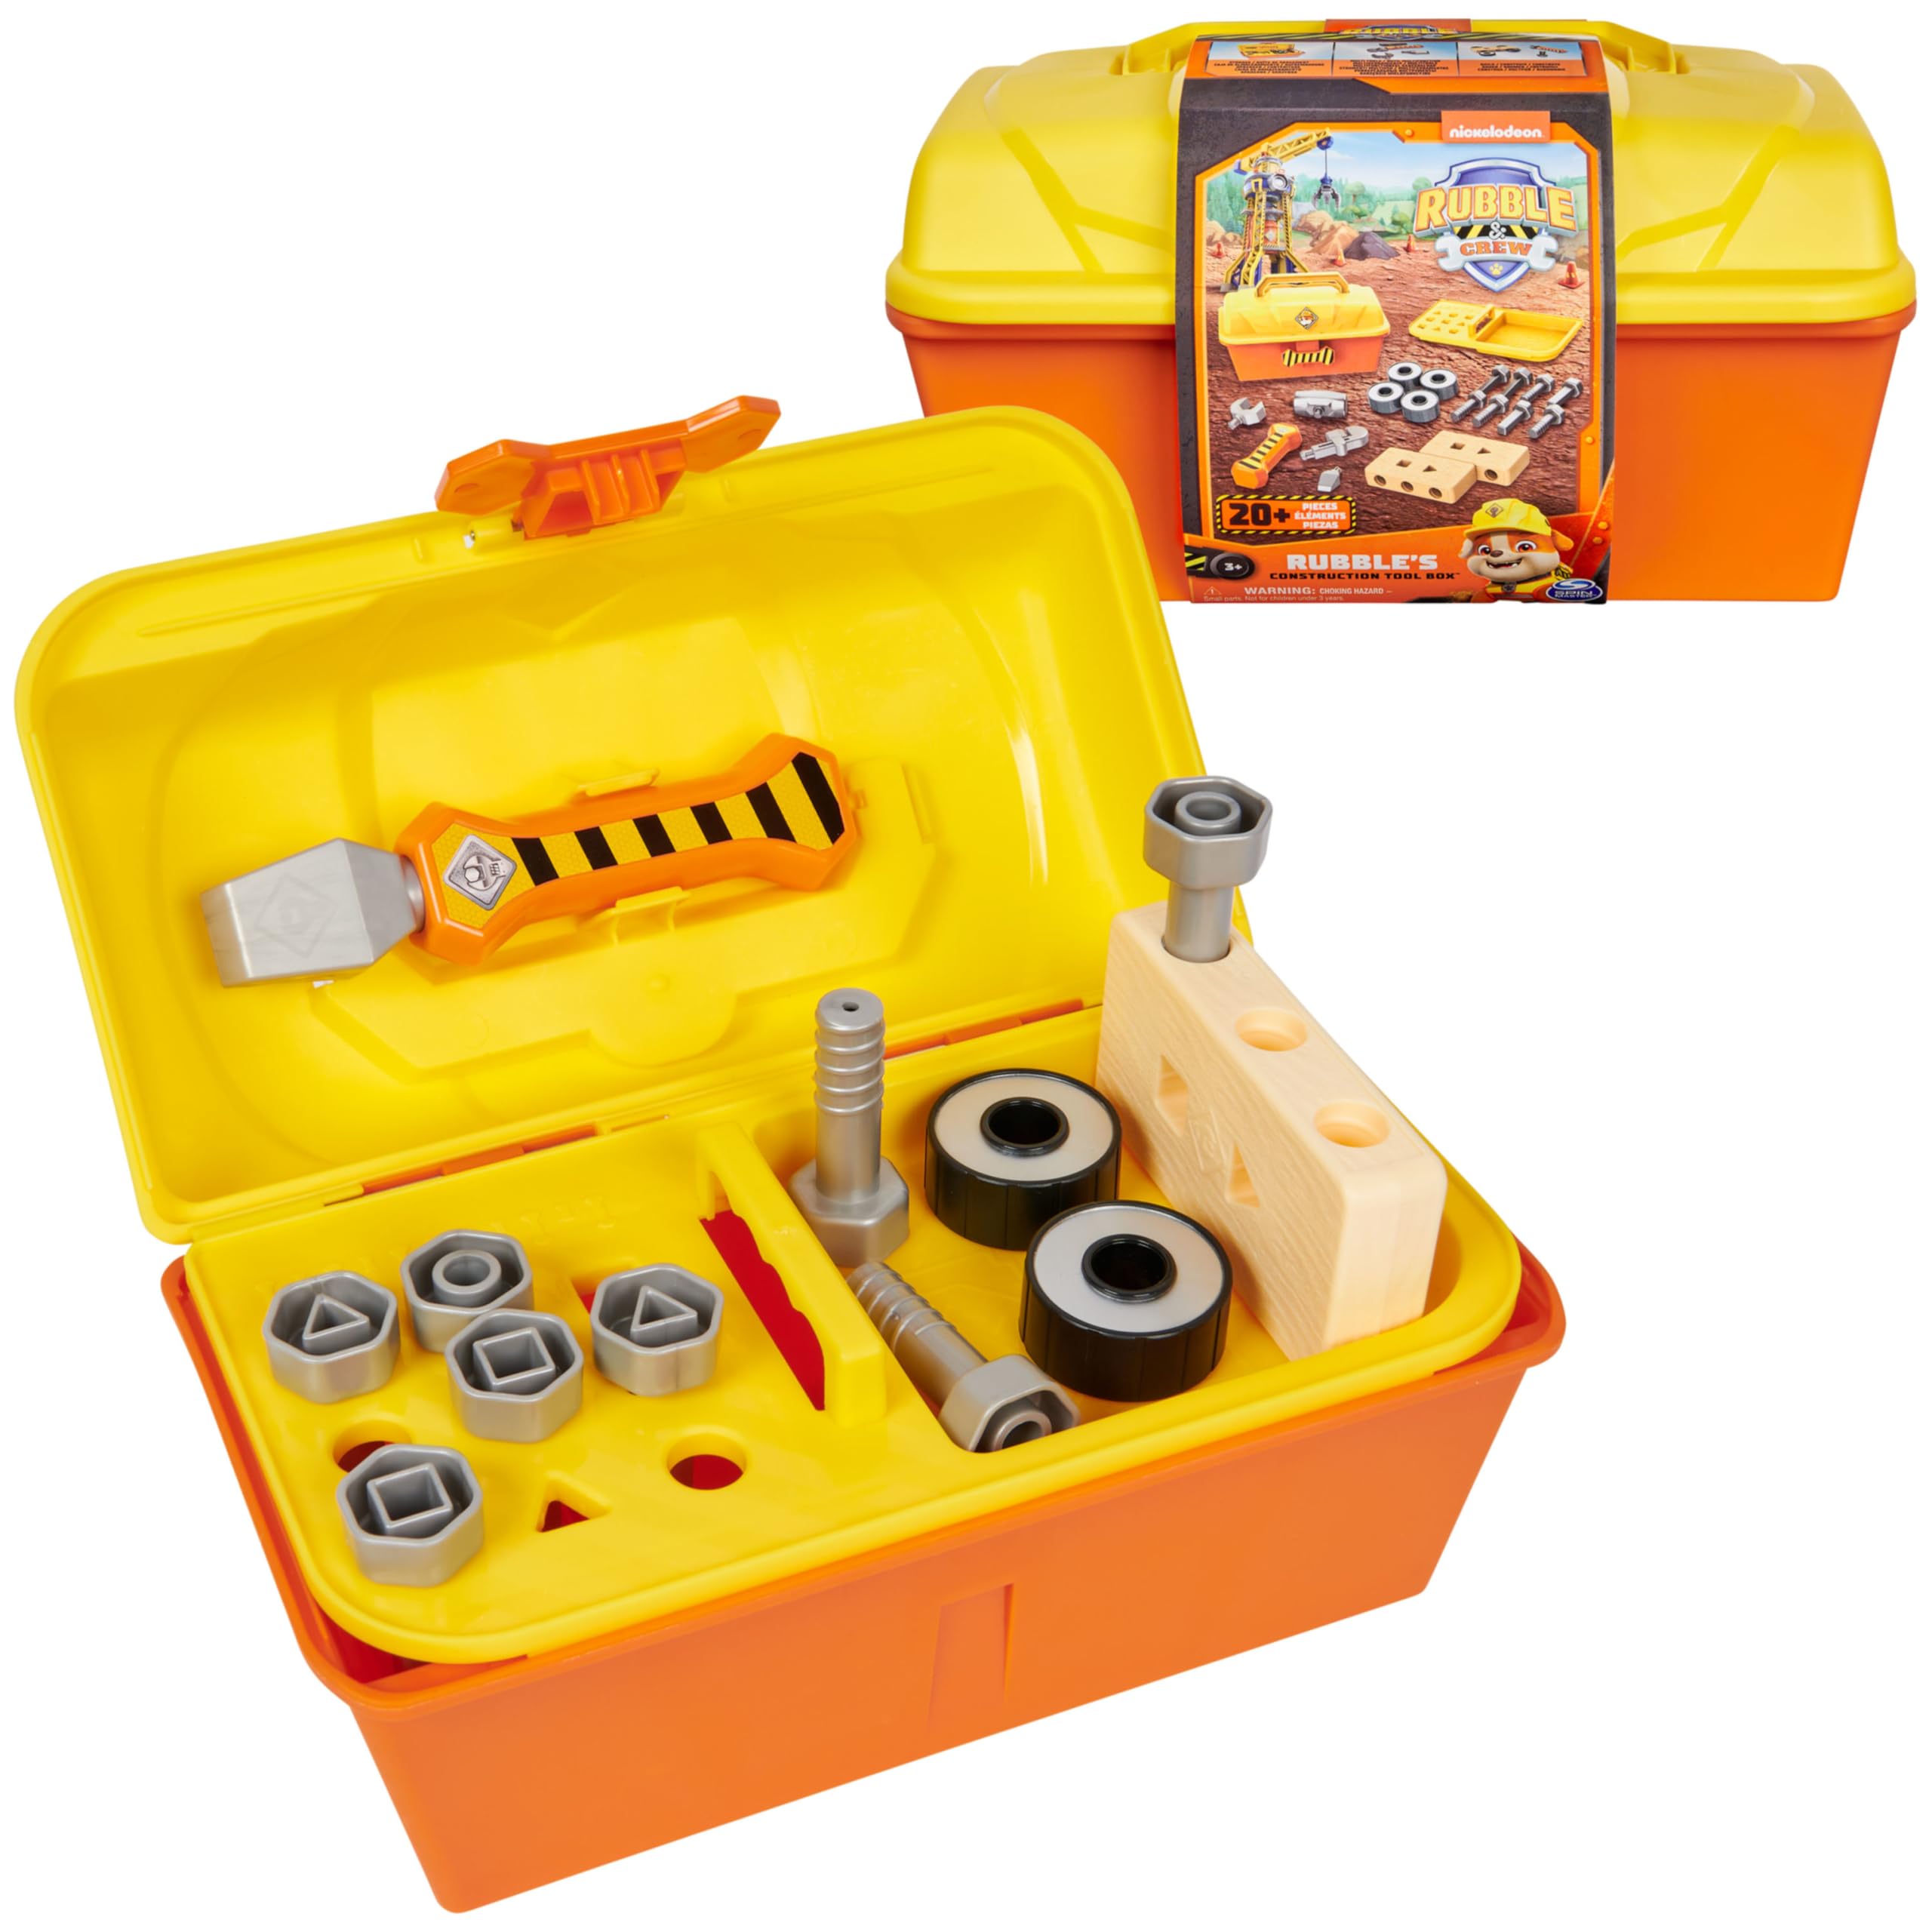 20-Piece Paw Patrol Rubble & Crew Rubble’s Construction Kid's Toolbox $10.57 + Free Shipping w/ Prime or on $35+